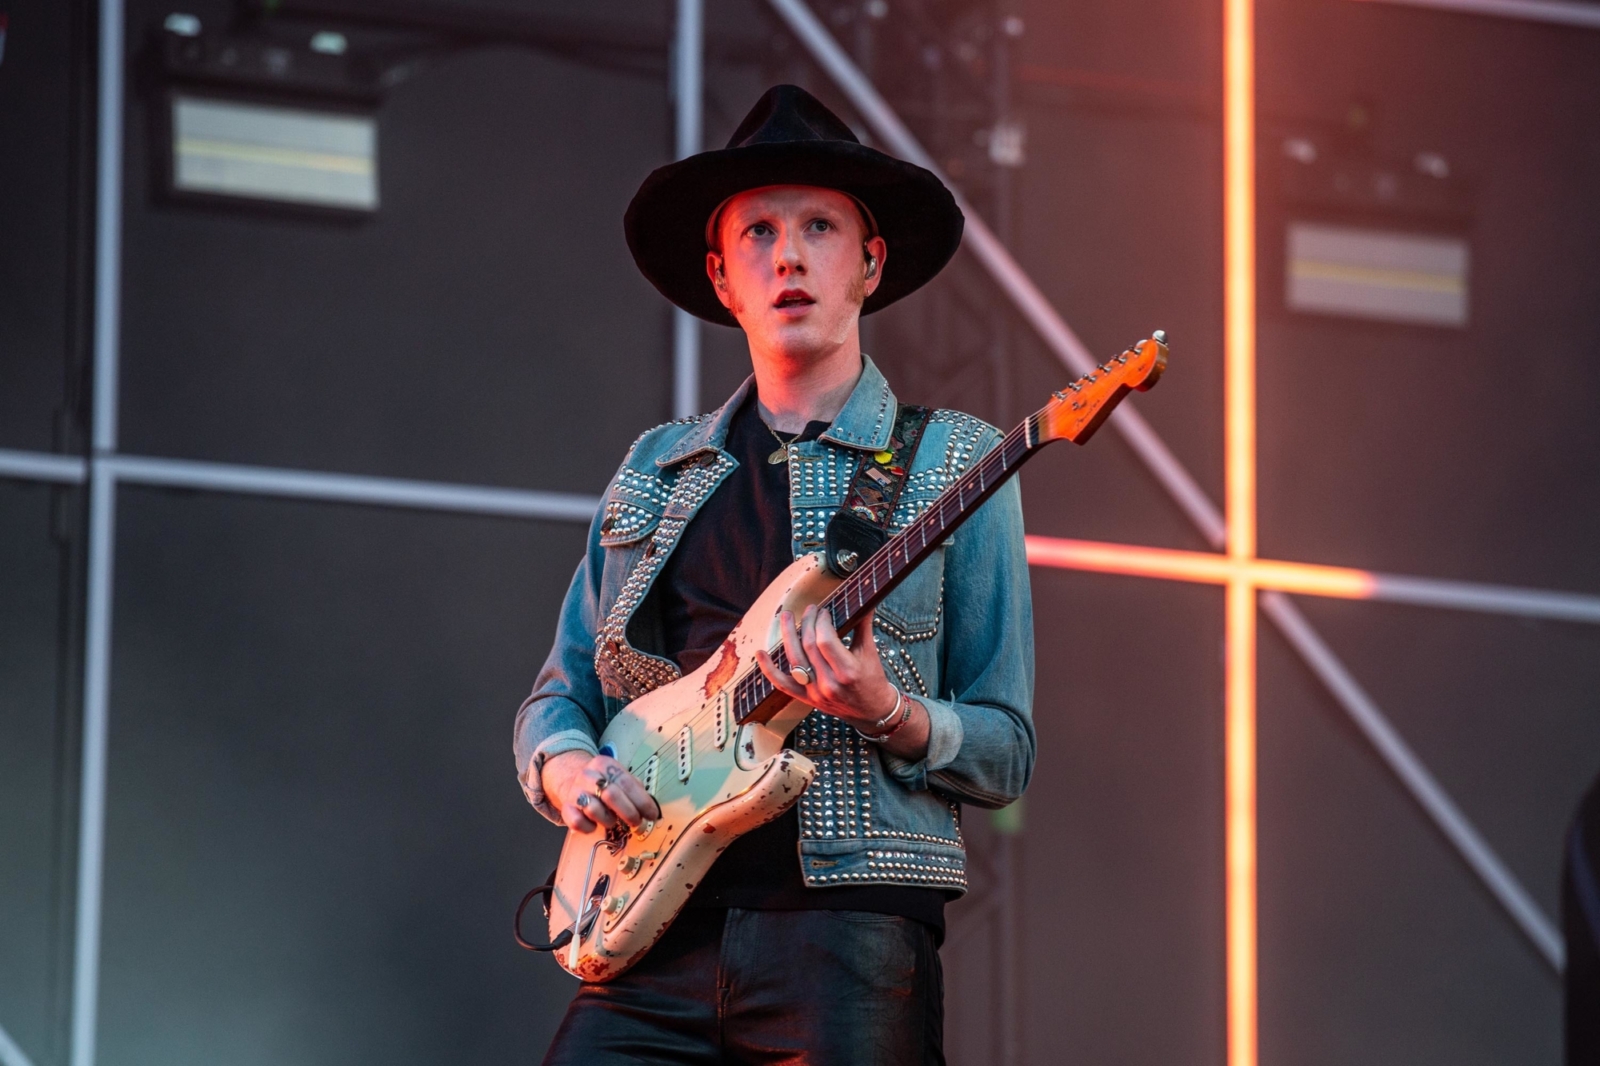 Two Door Cinema Club, Nile Rodgers & Chic, Shame, Sports Team and more to play Tramlines 2019